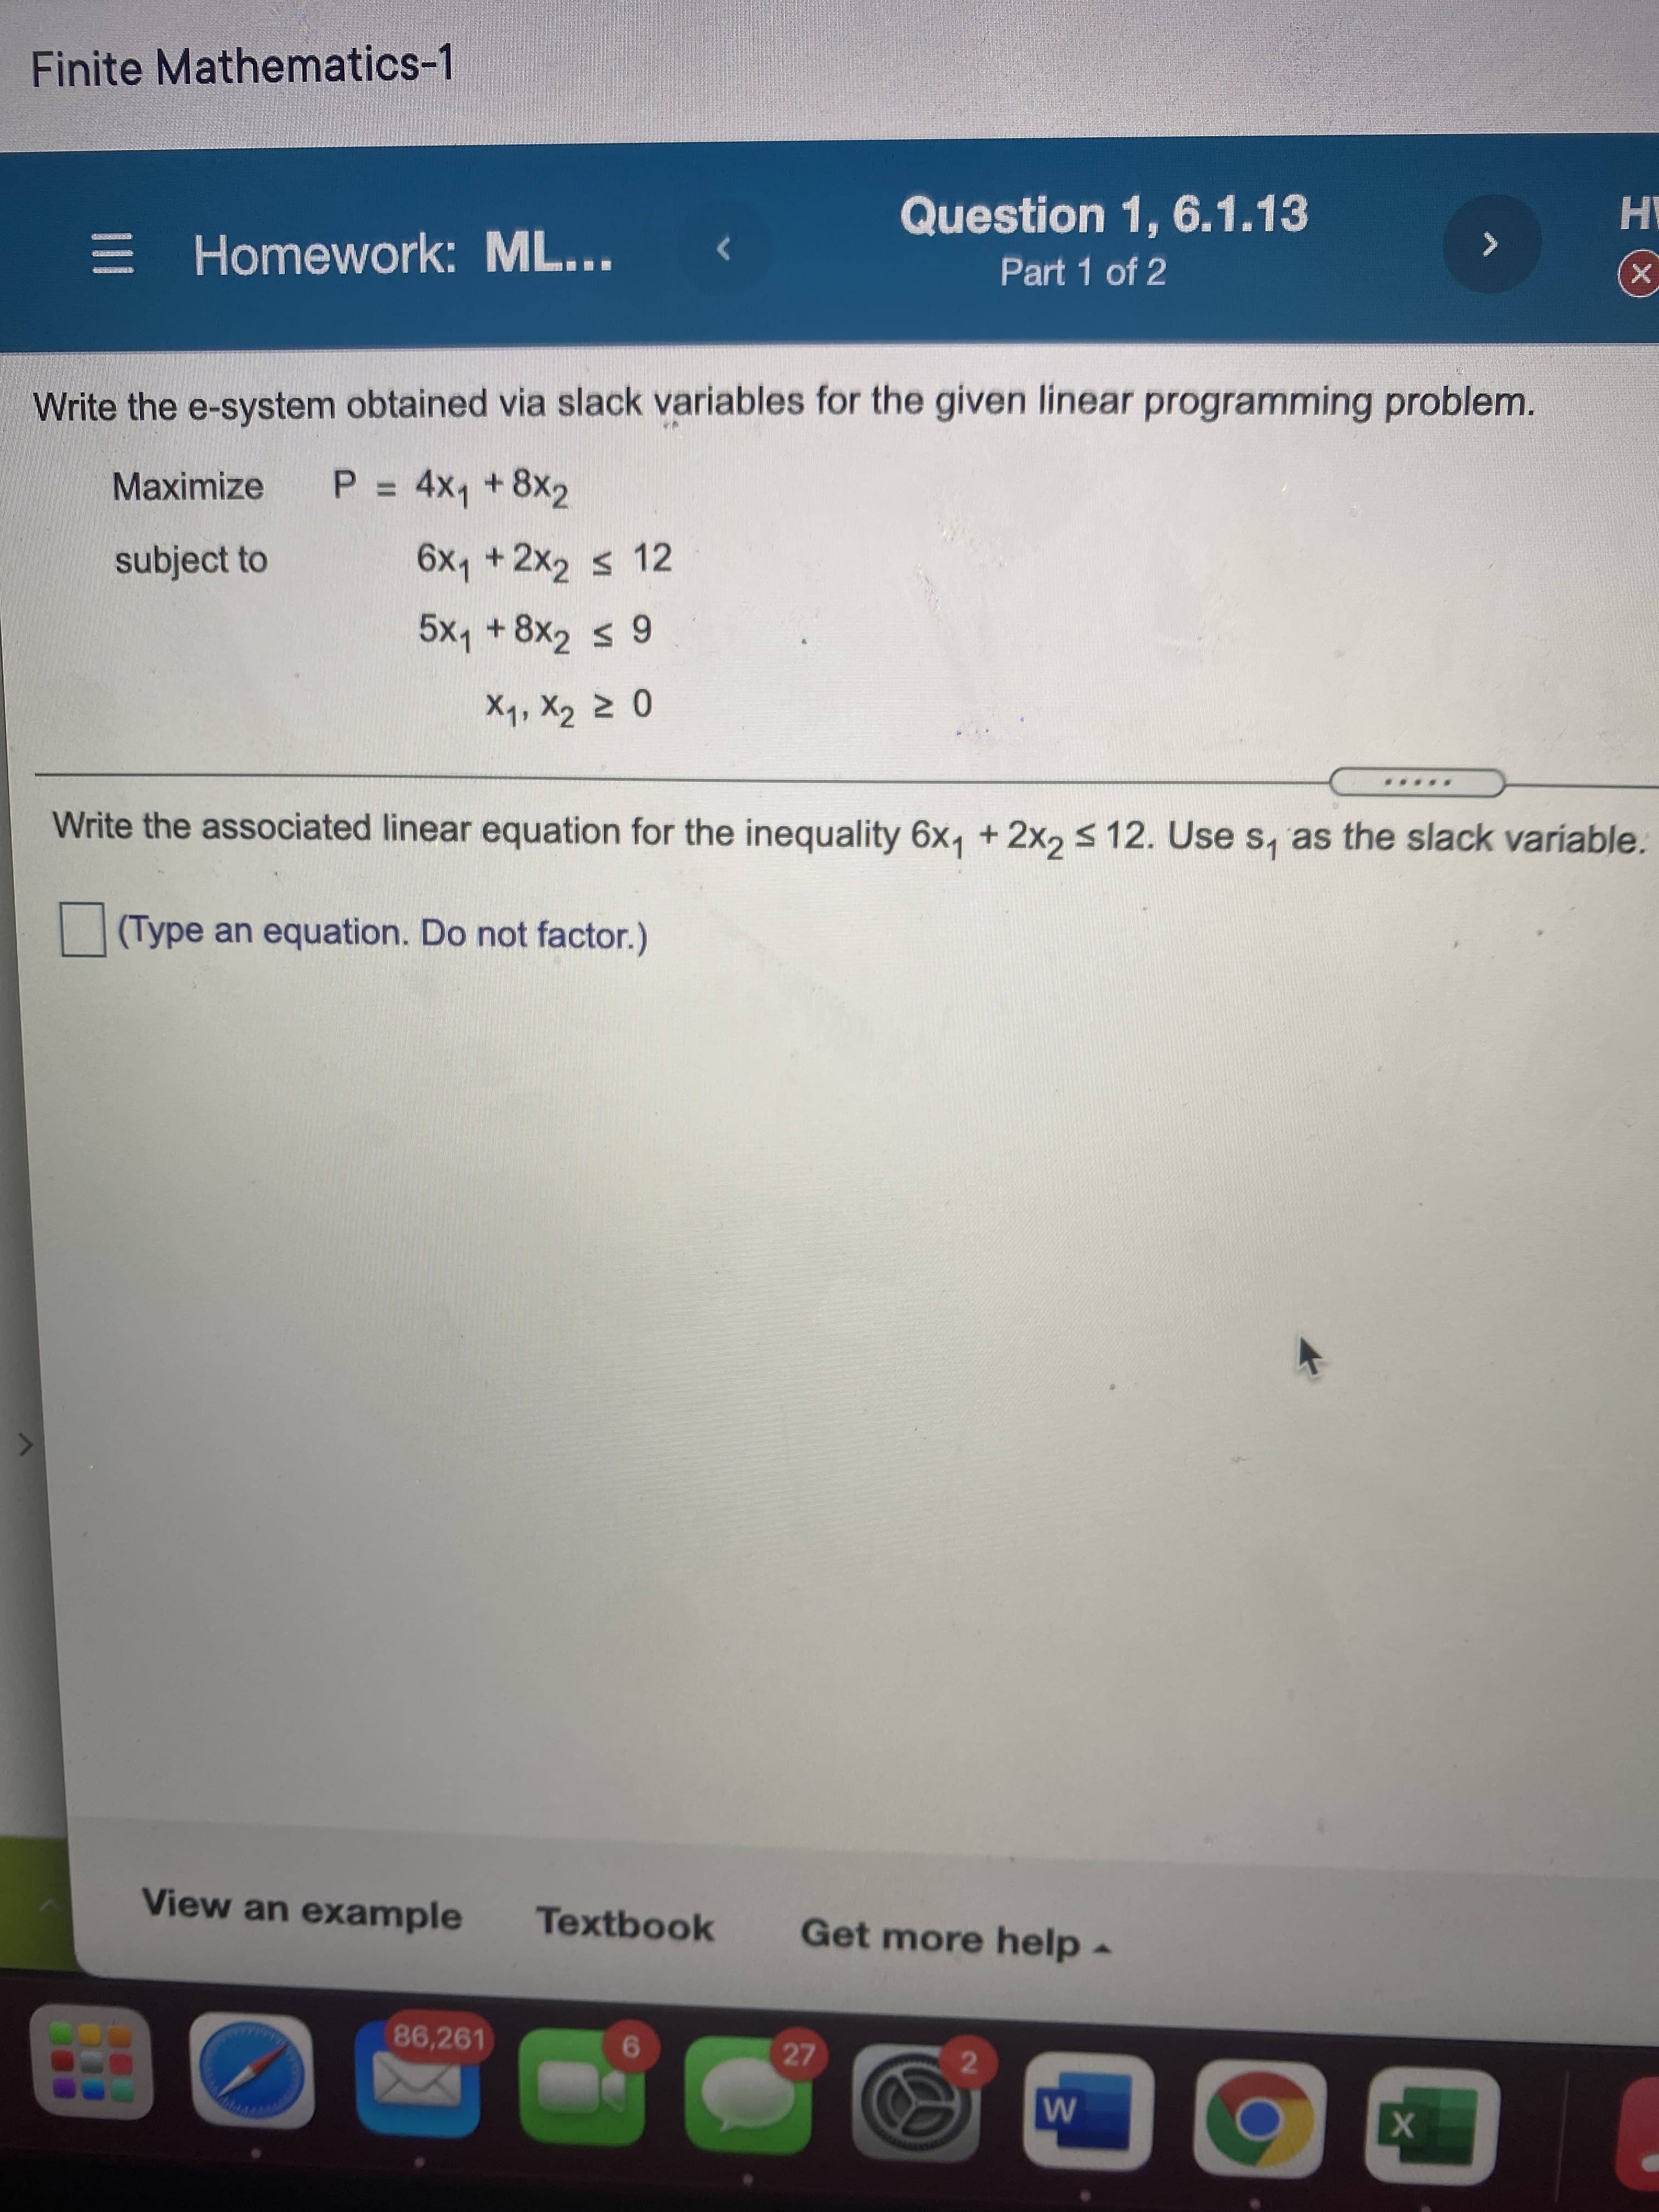 Finite Mathematics-1
E Homework: ML...
Question 1, 6.1.13
Part 1 of 2
Write the e-system obtained via slack variables for the given linear programming problem.
Maximize
P = 4x, +8x2
%3D
subject to
6x1 +2x2 s 12
5x, +8x, s 9
Write the associated linear equation for the inequality 6x, + 2x, s 12. Use s, as the slack variable.
(Type an equation. Do not factor.)
View an example
Textbook
Get more help-
86,261
27
6.
2.
